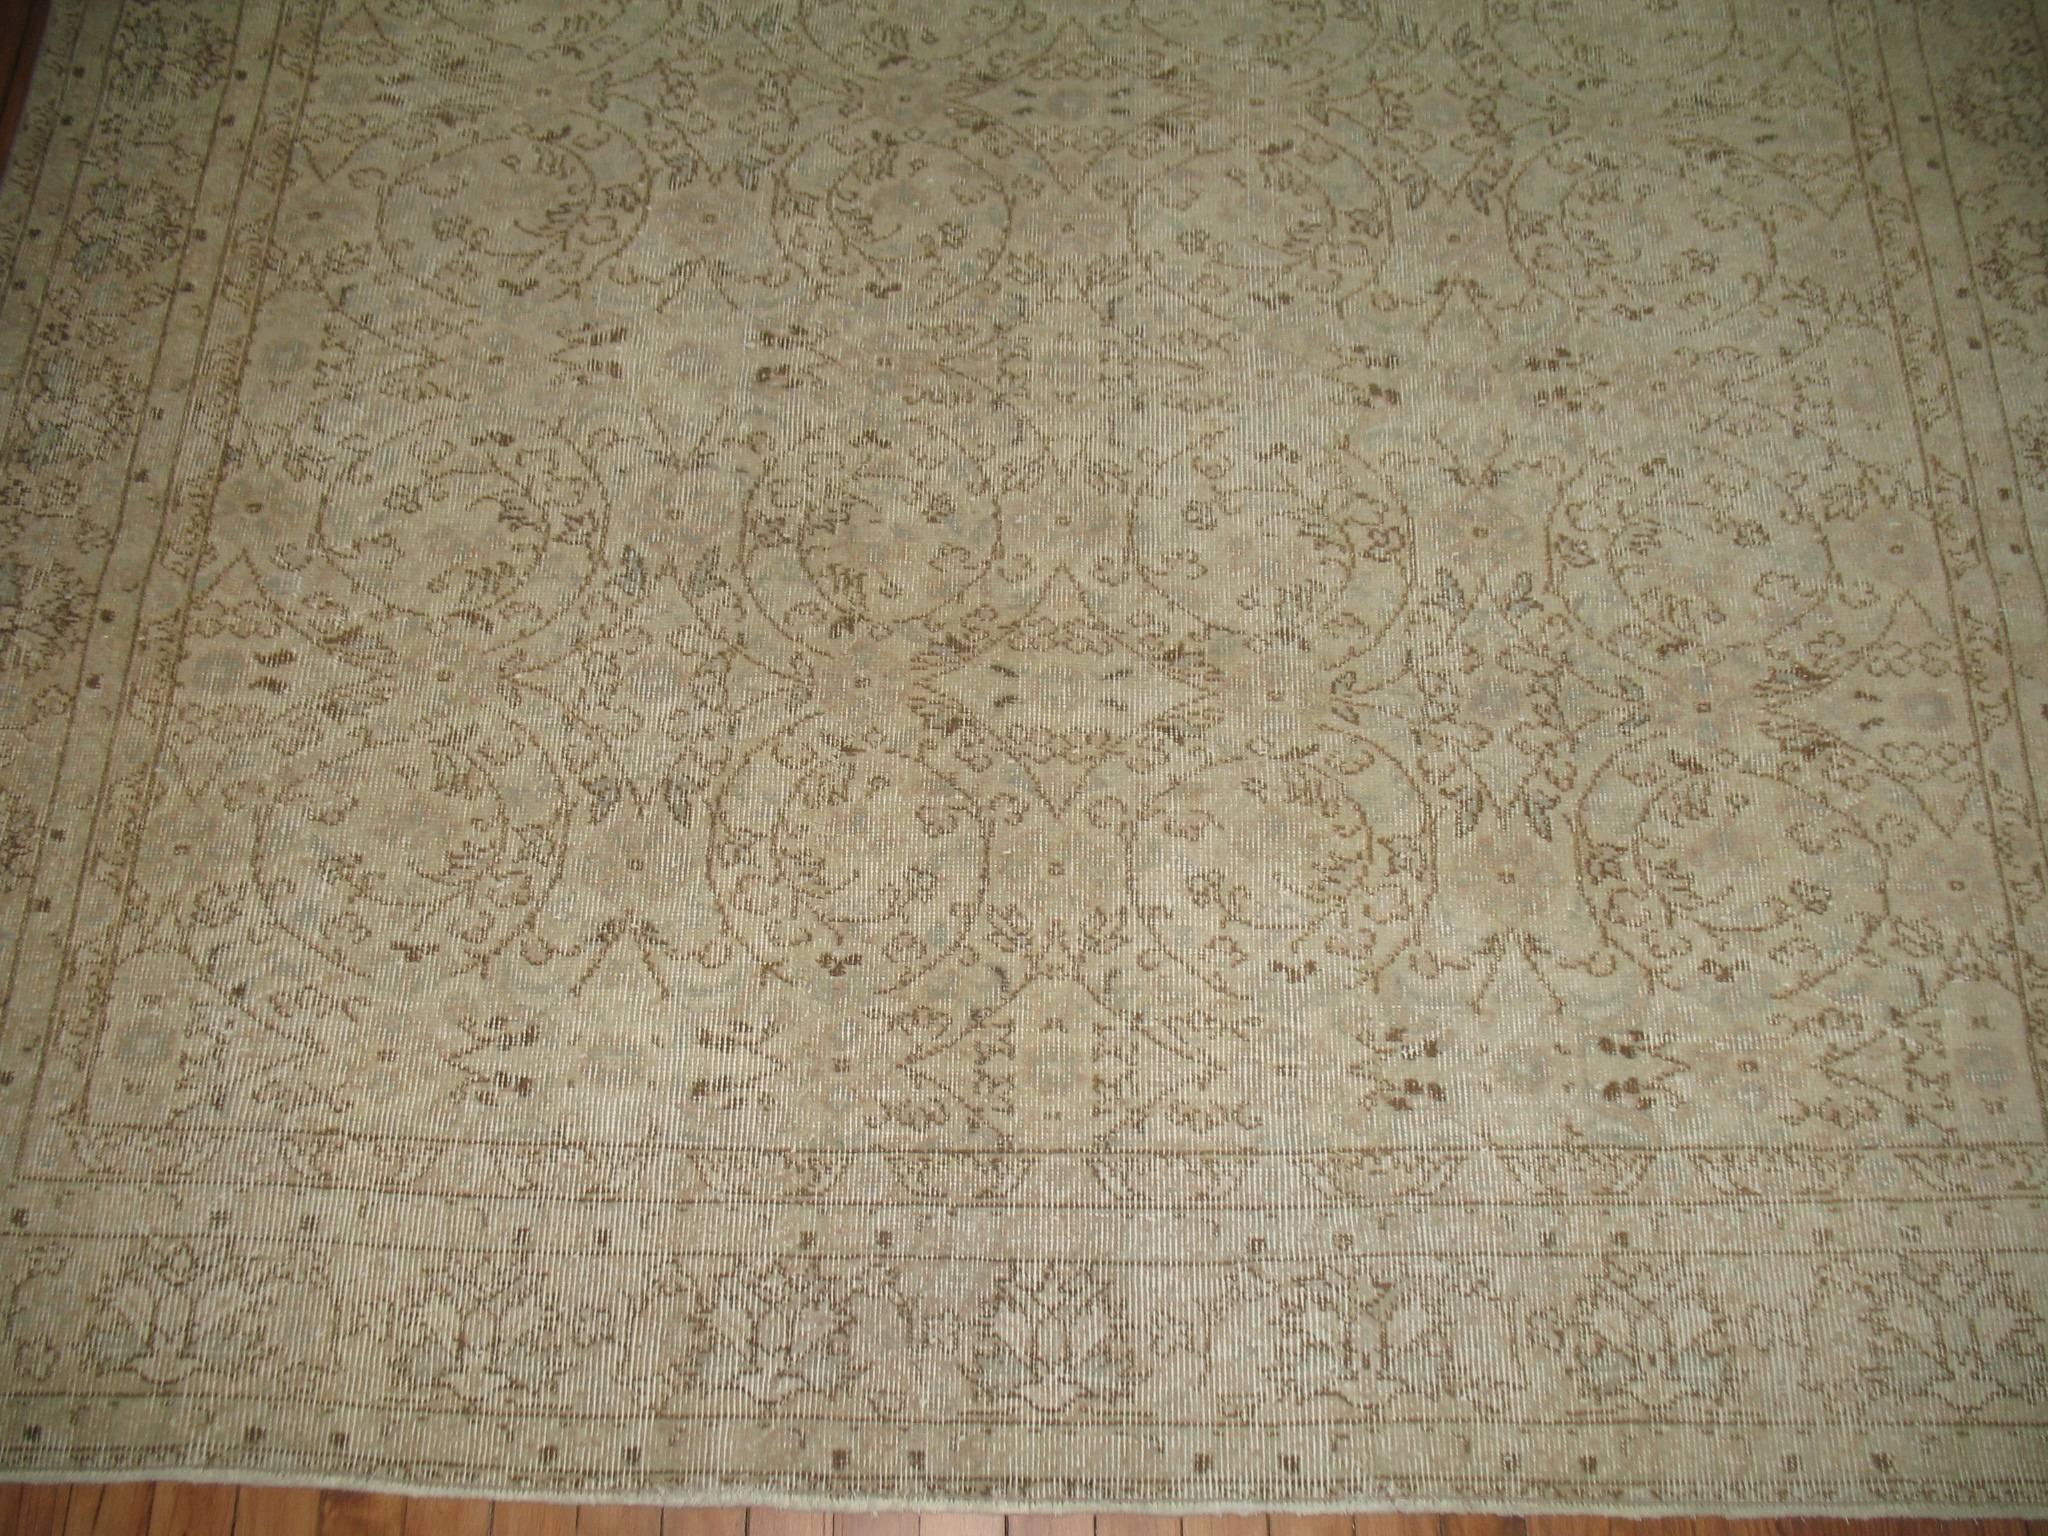 Hand-Knotted Shabby Chic Turkish Rug with White and Taupe Accents